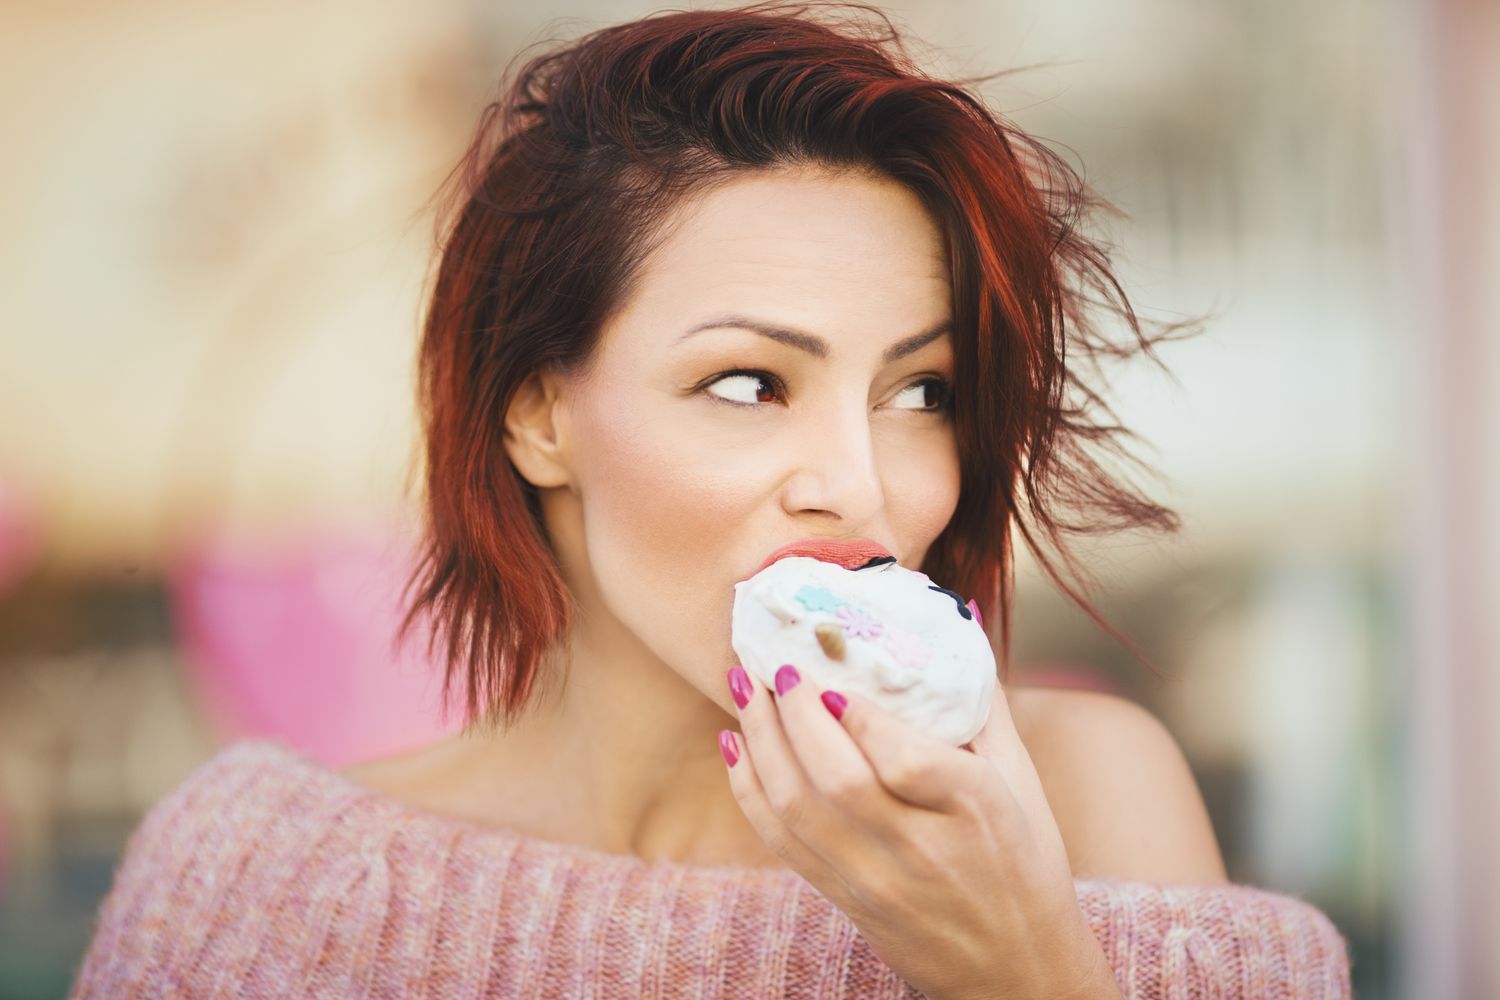 Girl with short hair eating a donut